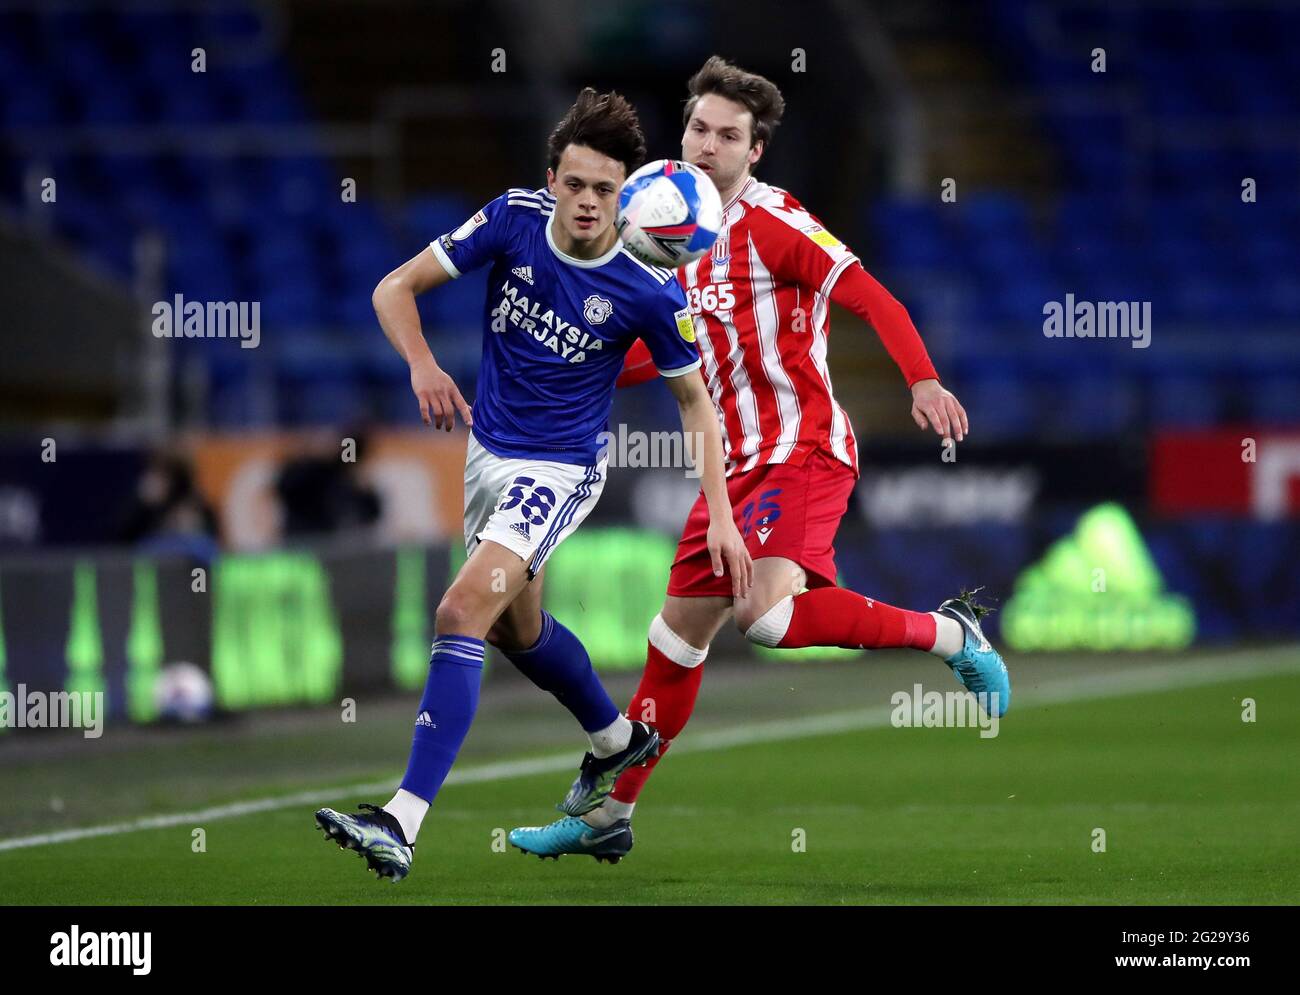 Cardiff City's Perry Ng battles for the ball with Stoke City's Nick Powell during the Sky Bet Championship match at Cardiff City Stadium, Cardiff. Picture date: Tuesday March 16, 2021. Stock Photo